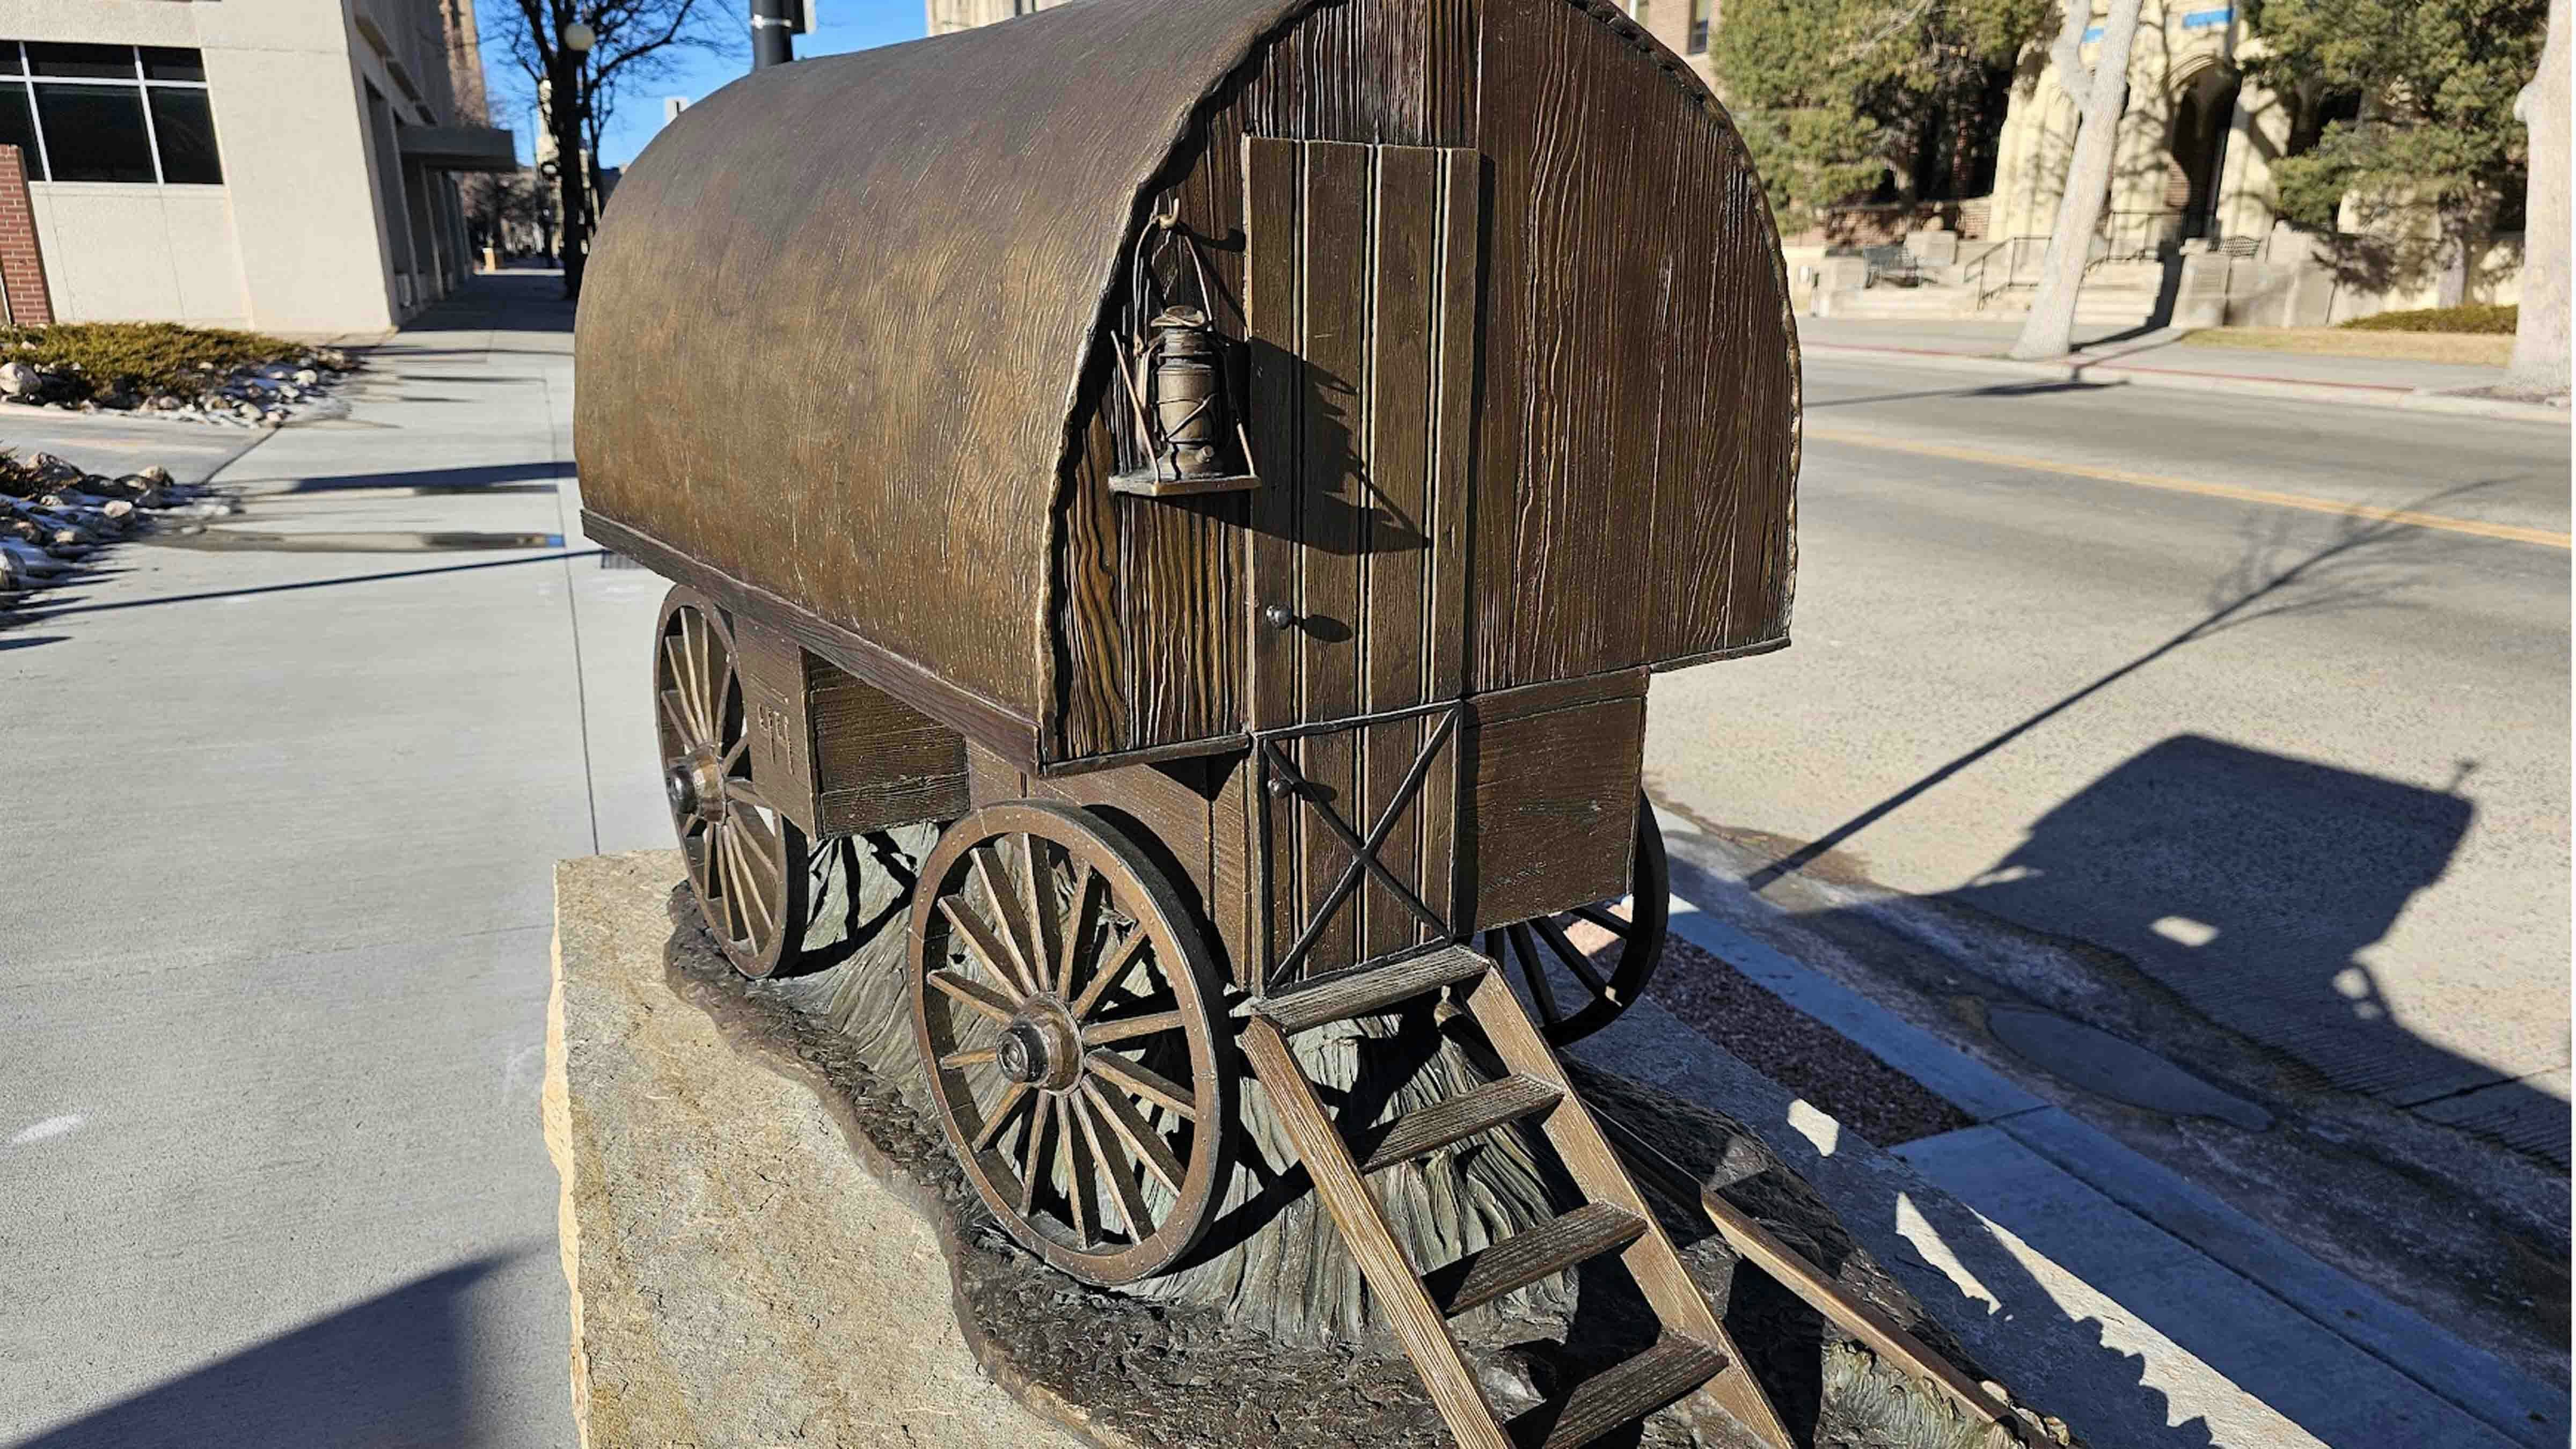 Even the sheep wagon has been immortalized in Cheyenne's more than 62 bronzes. This iconic symbol rests between 21st and 20th Streets on Capitol Avenue. Its sculptor was Tanner Loren and its donors Fred and Karen Emerich